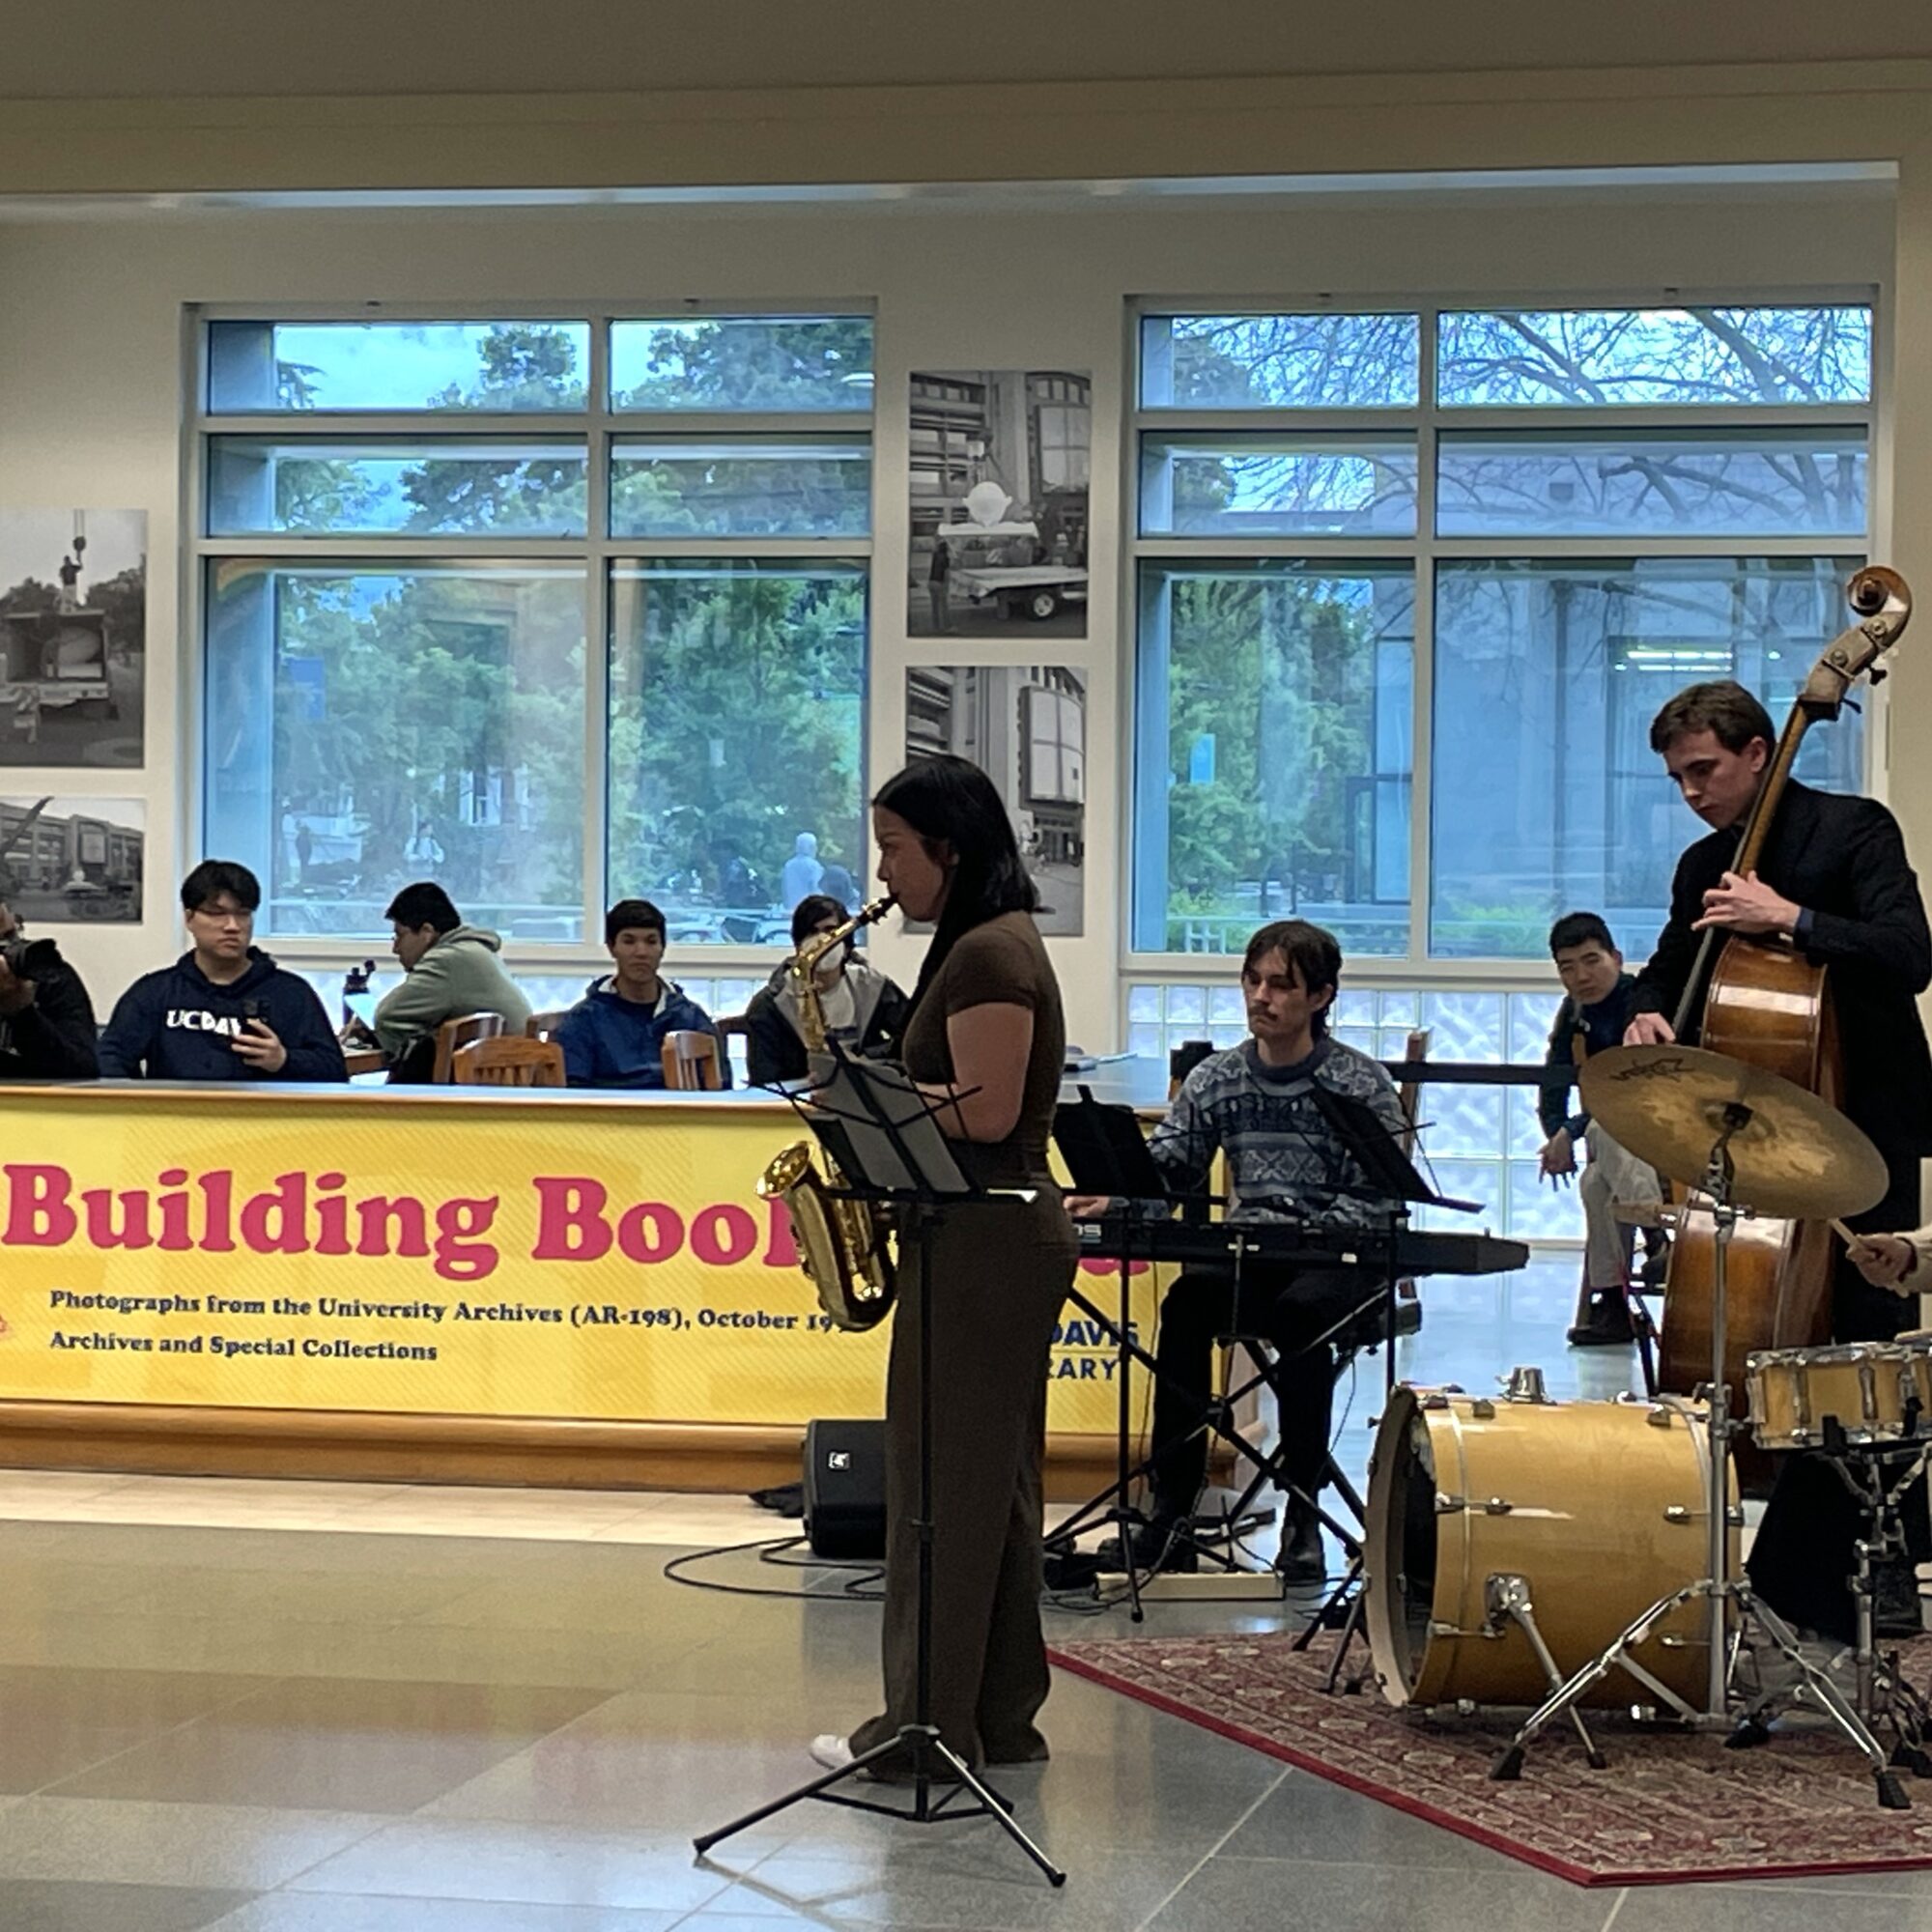 Jazz band performs in the lobby of Shields Library, with an exhibit about the Bookhead sculpture in the background